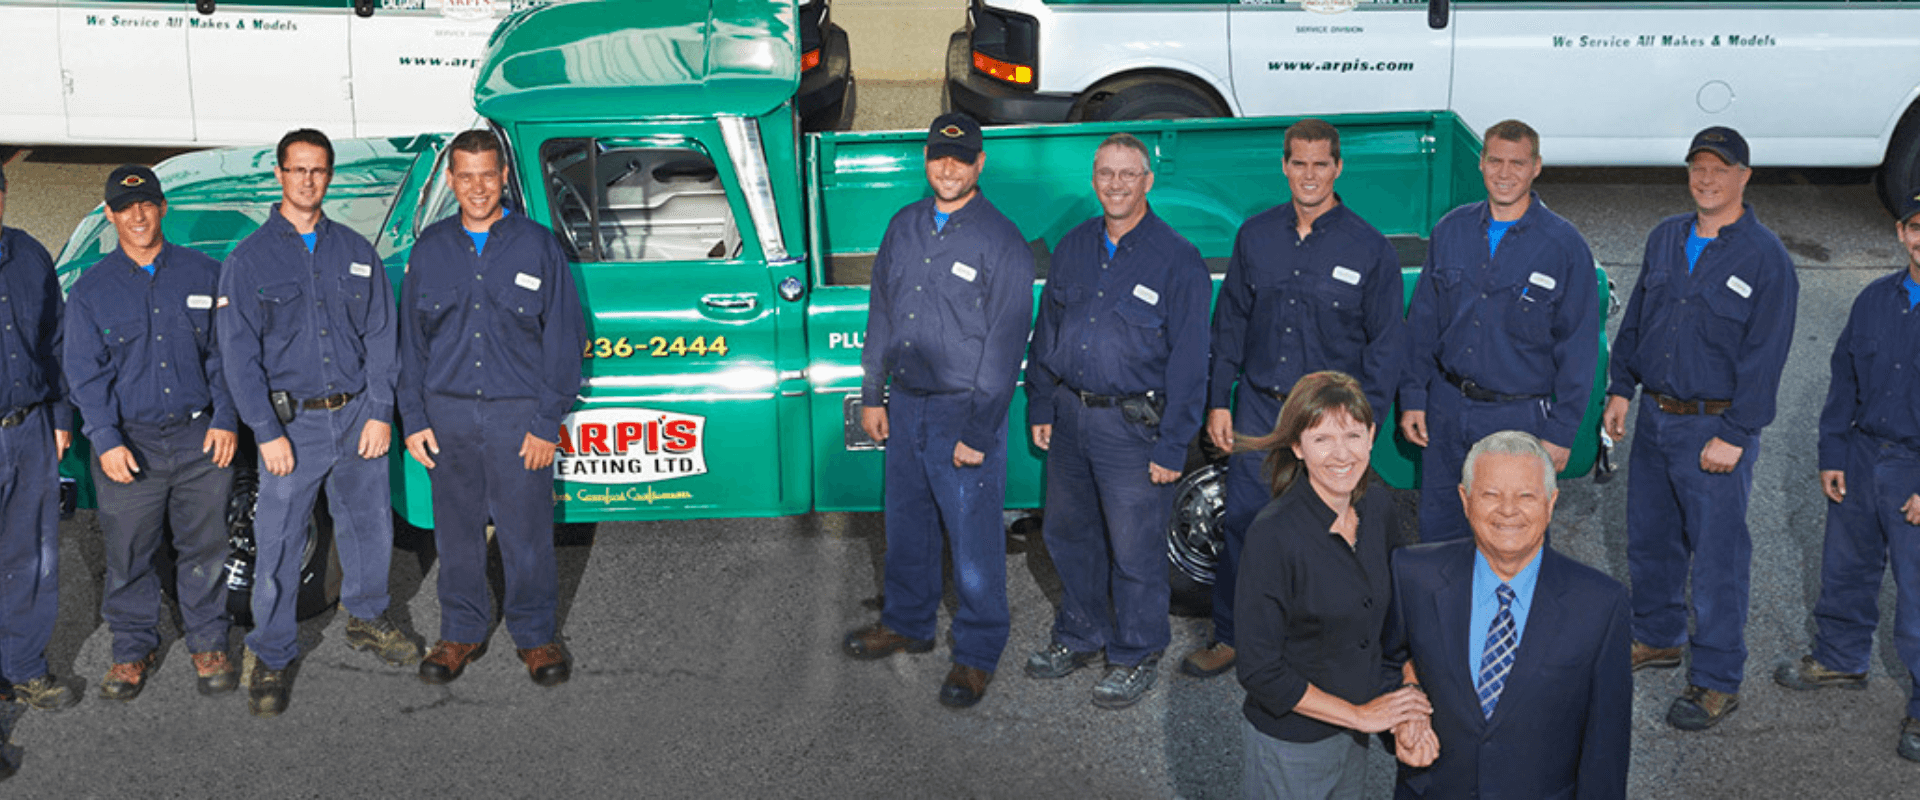 About Arpi's Mechanical Contracting team